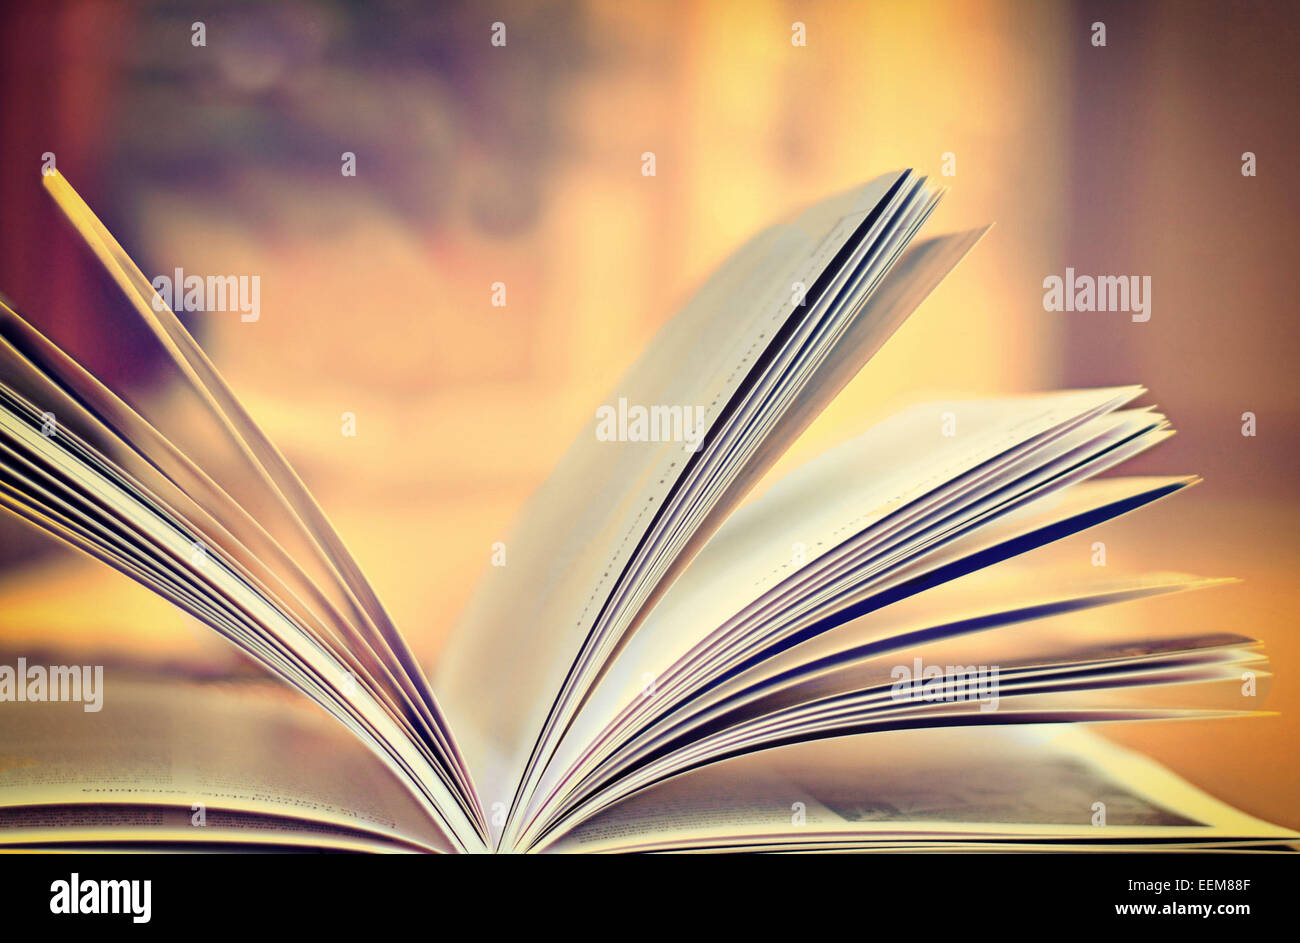 Close up of open book Stock Photo